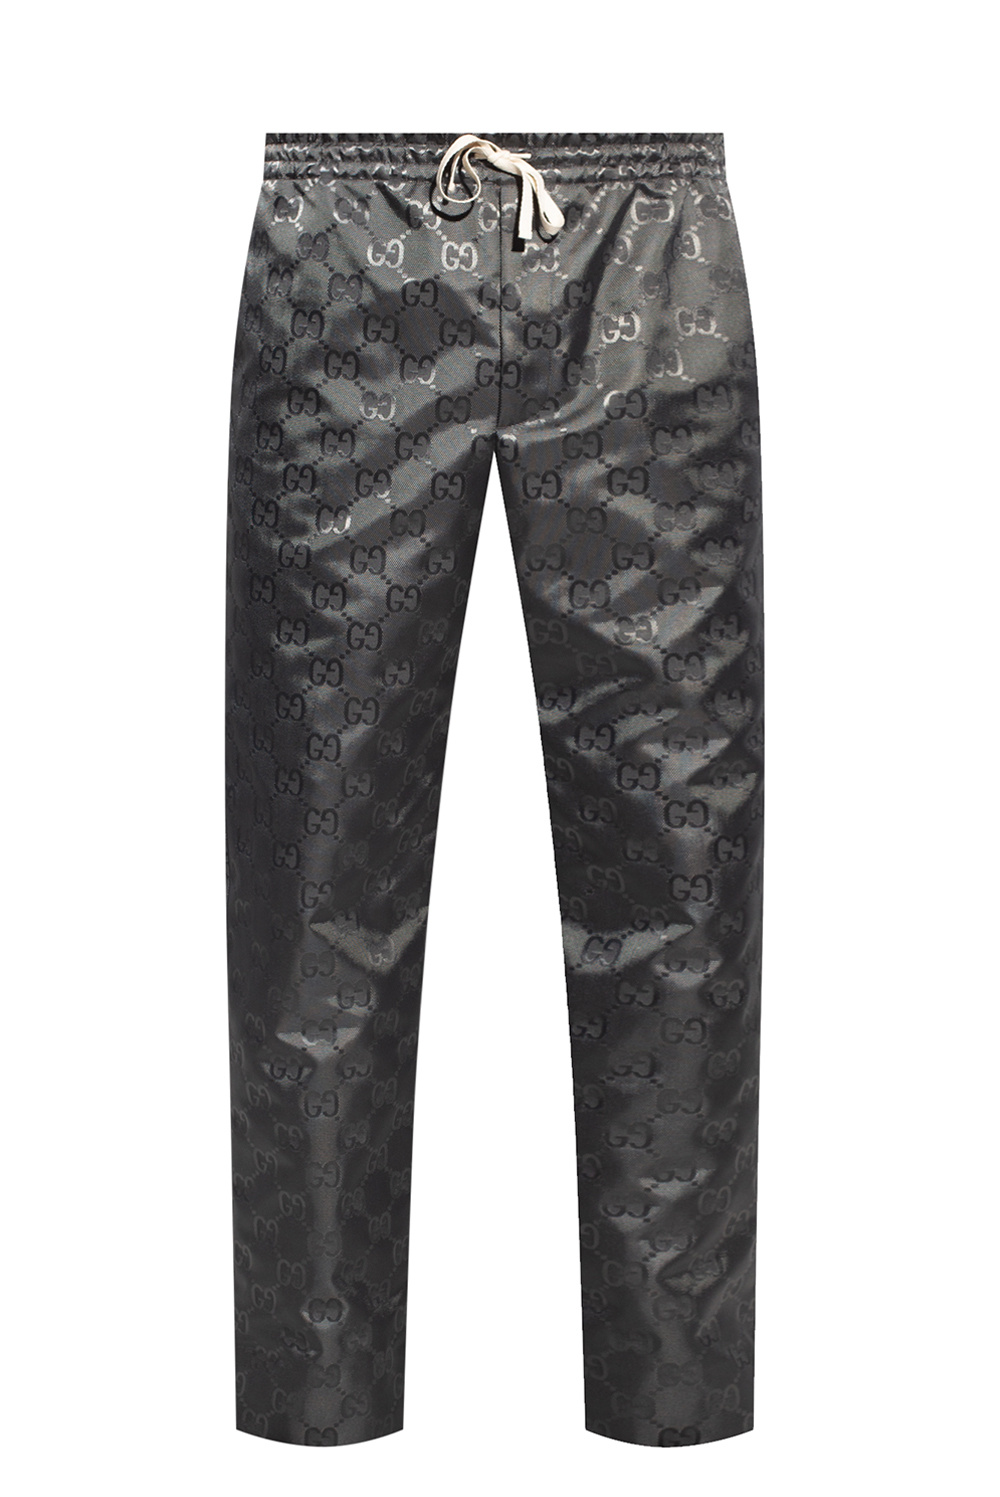 Gucci Trousers with GG monogram